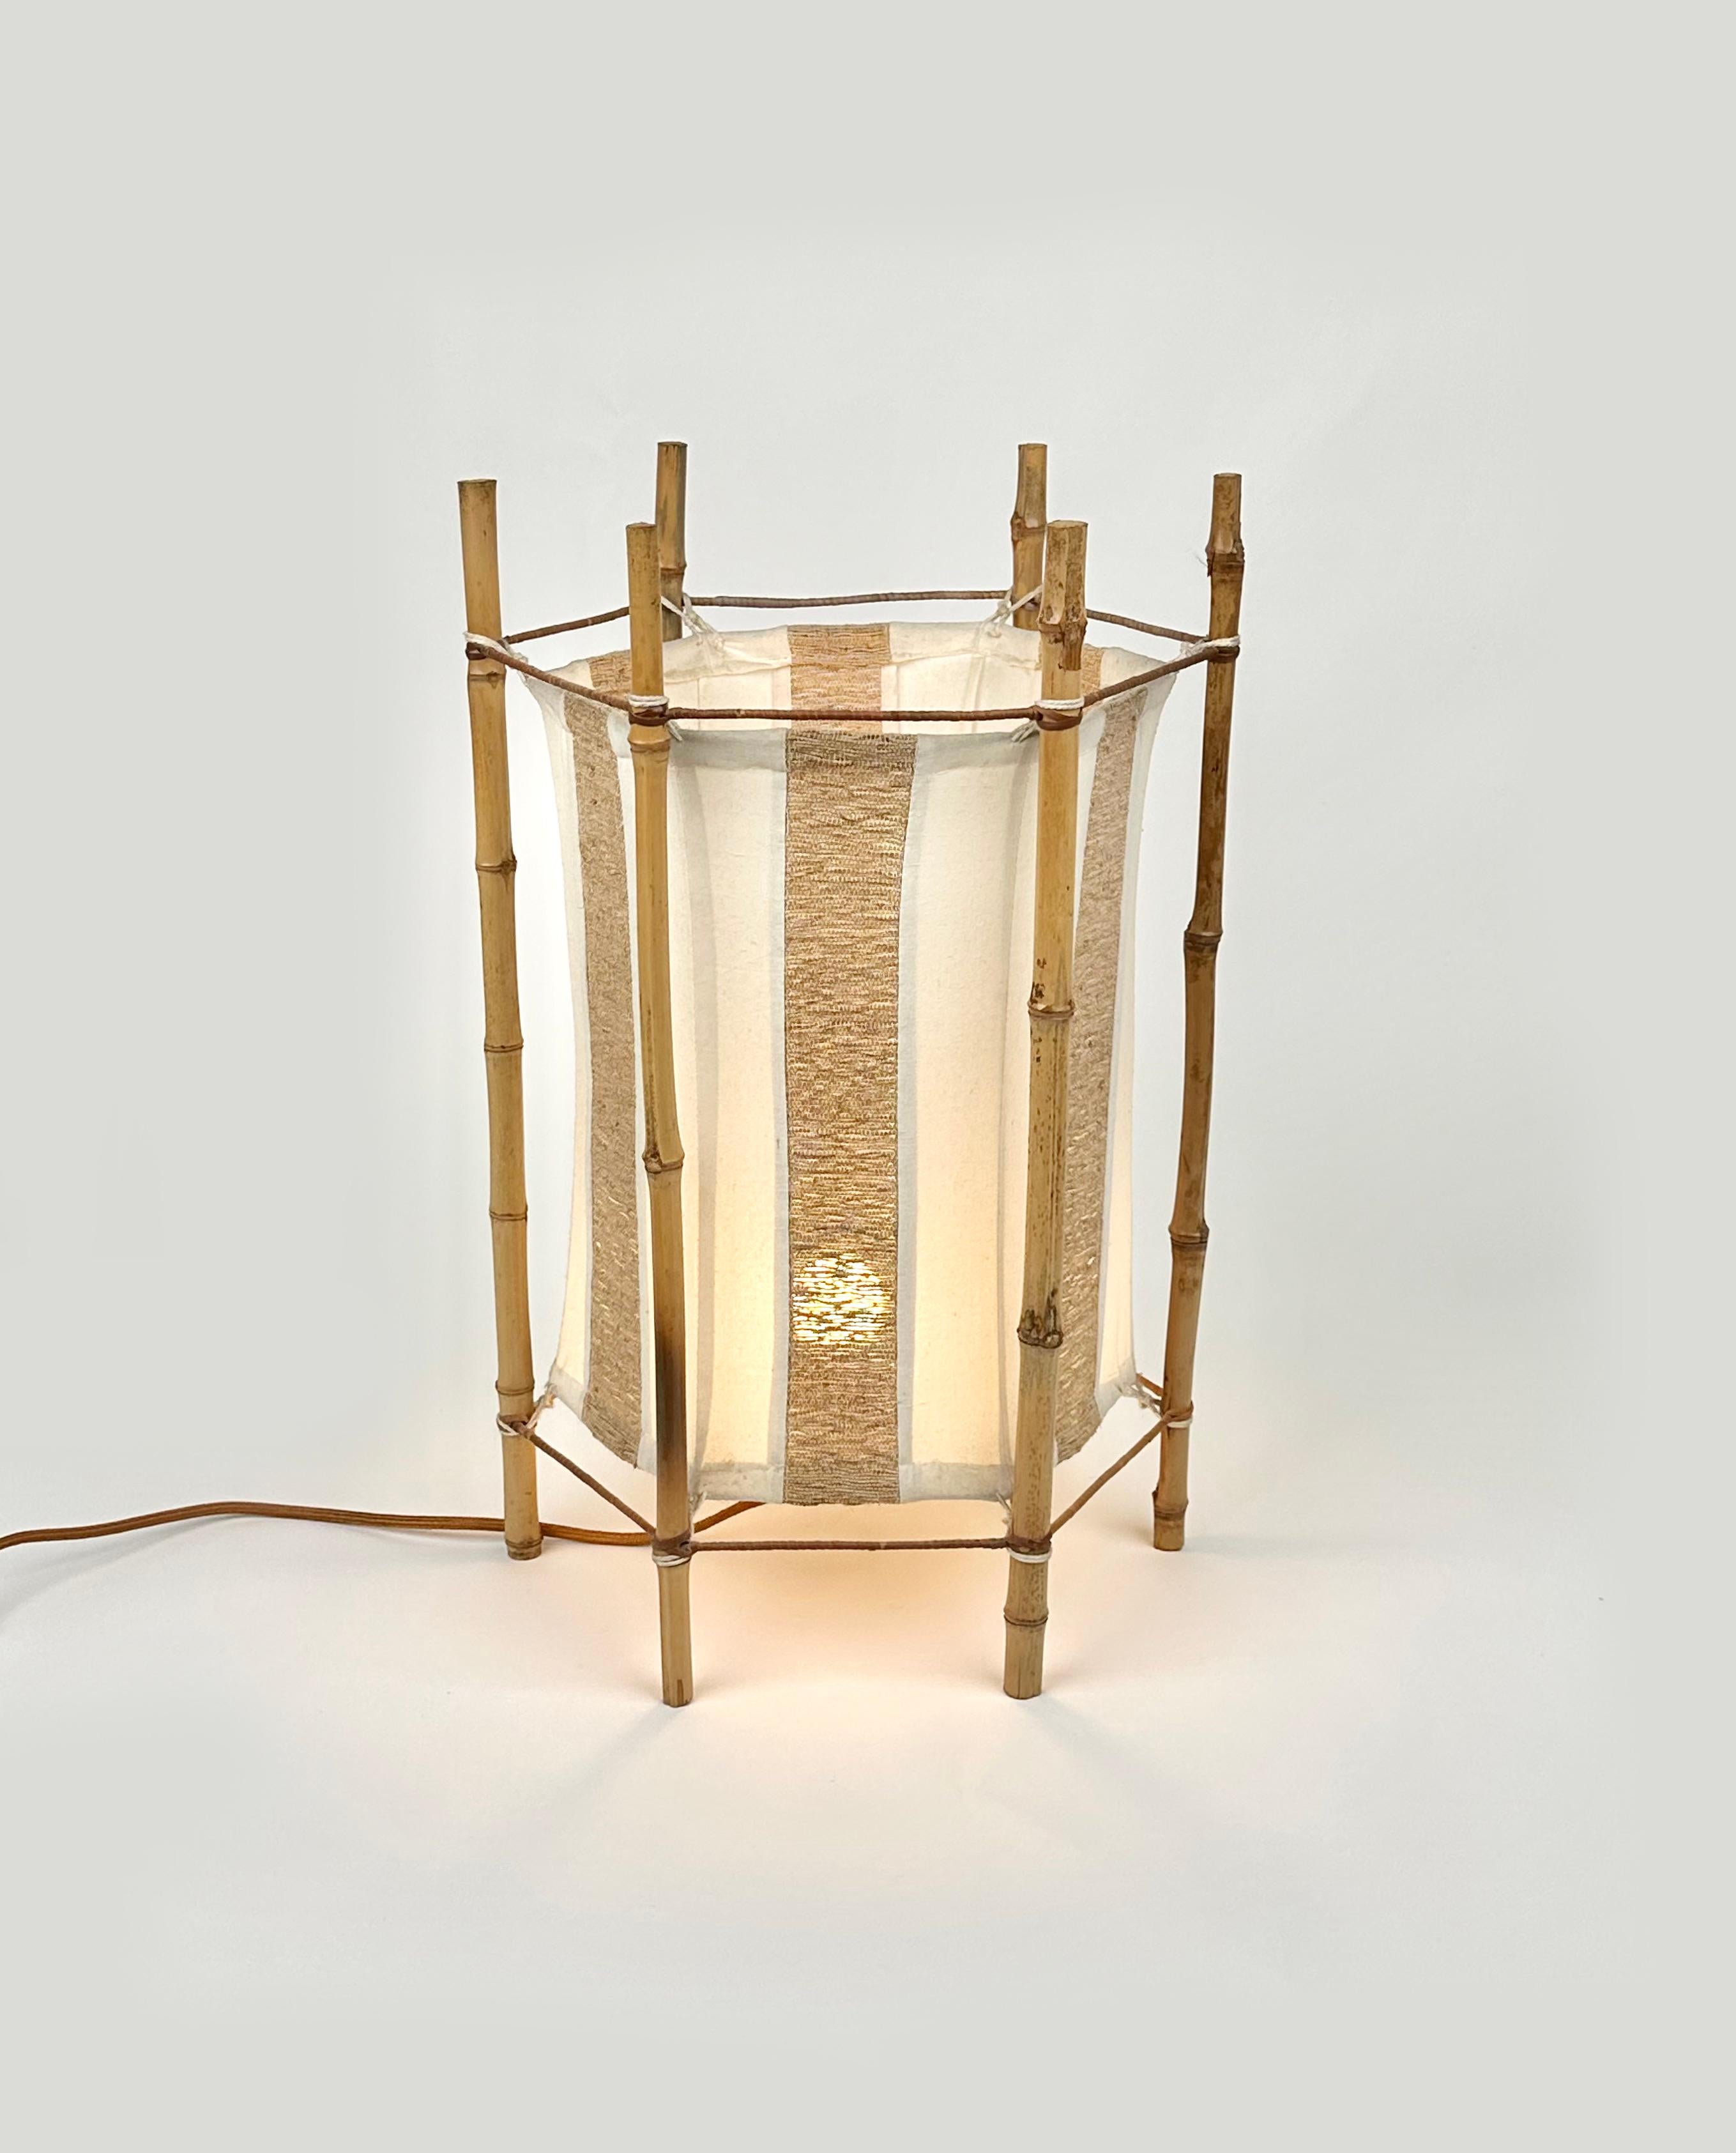 Mid-20th Century Bamboo, Rattan and Cotton Table or Floor Lamp Louis Sognot style, Italy 1960s For Sale